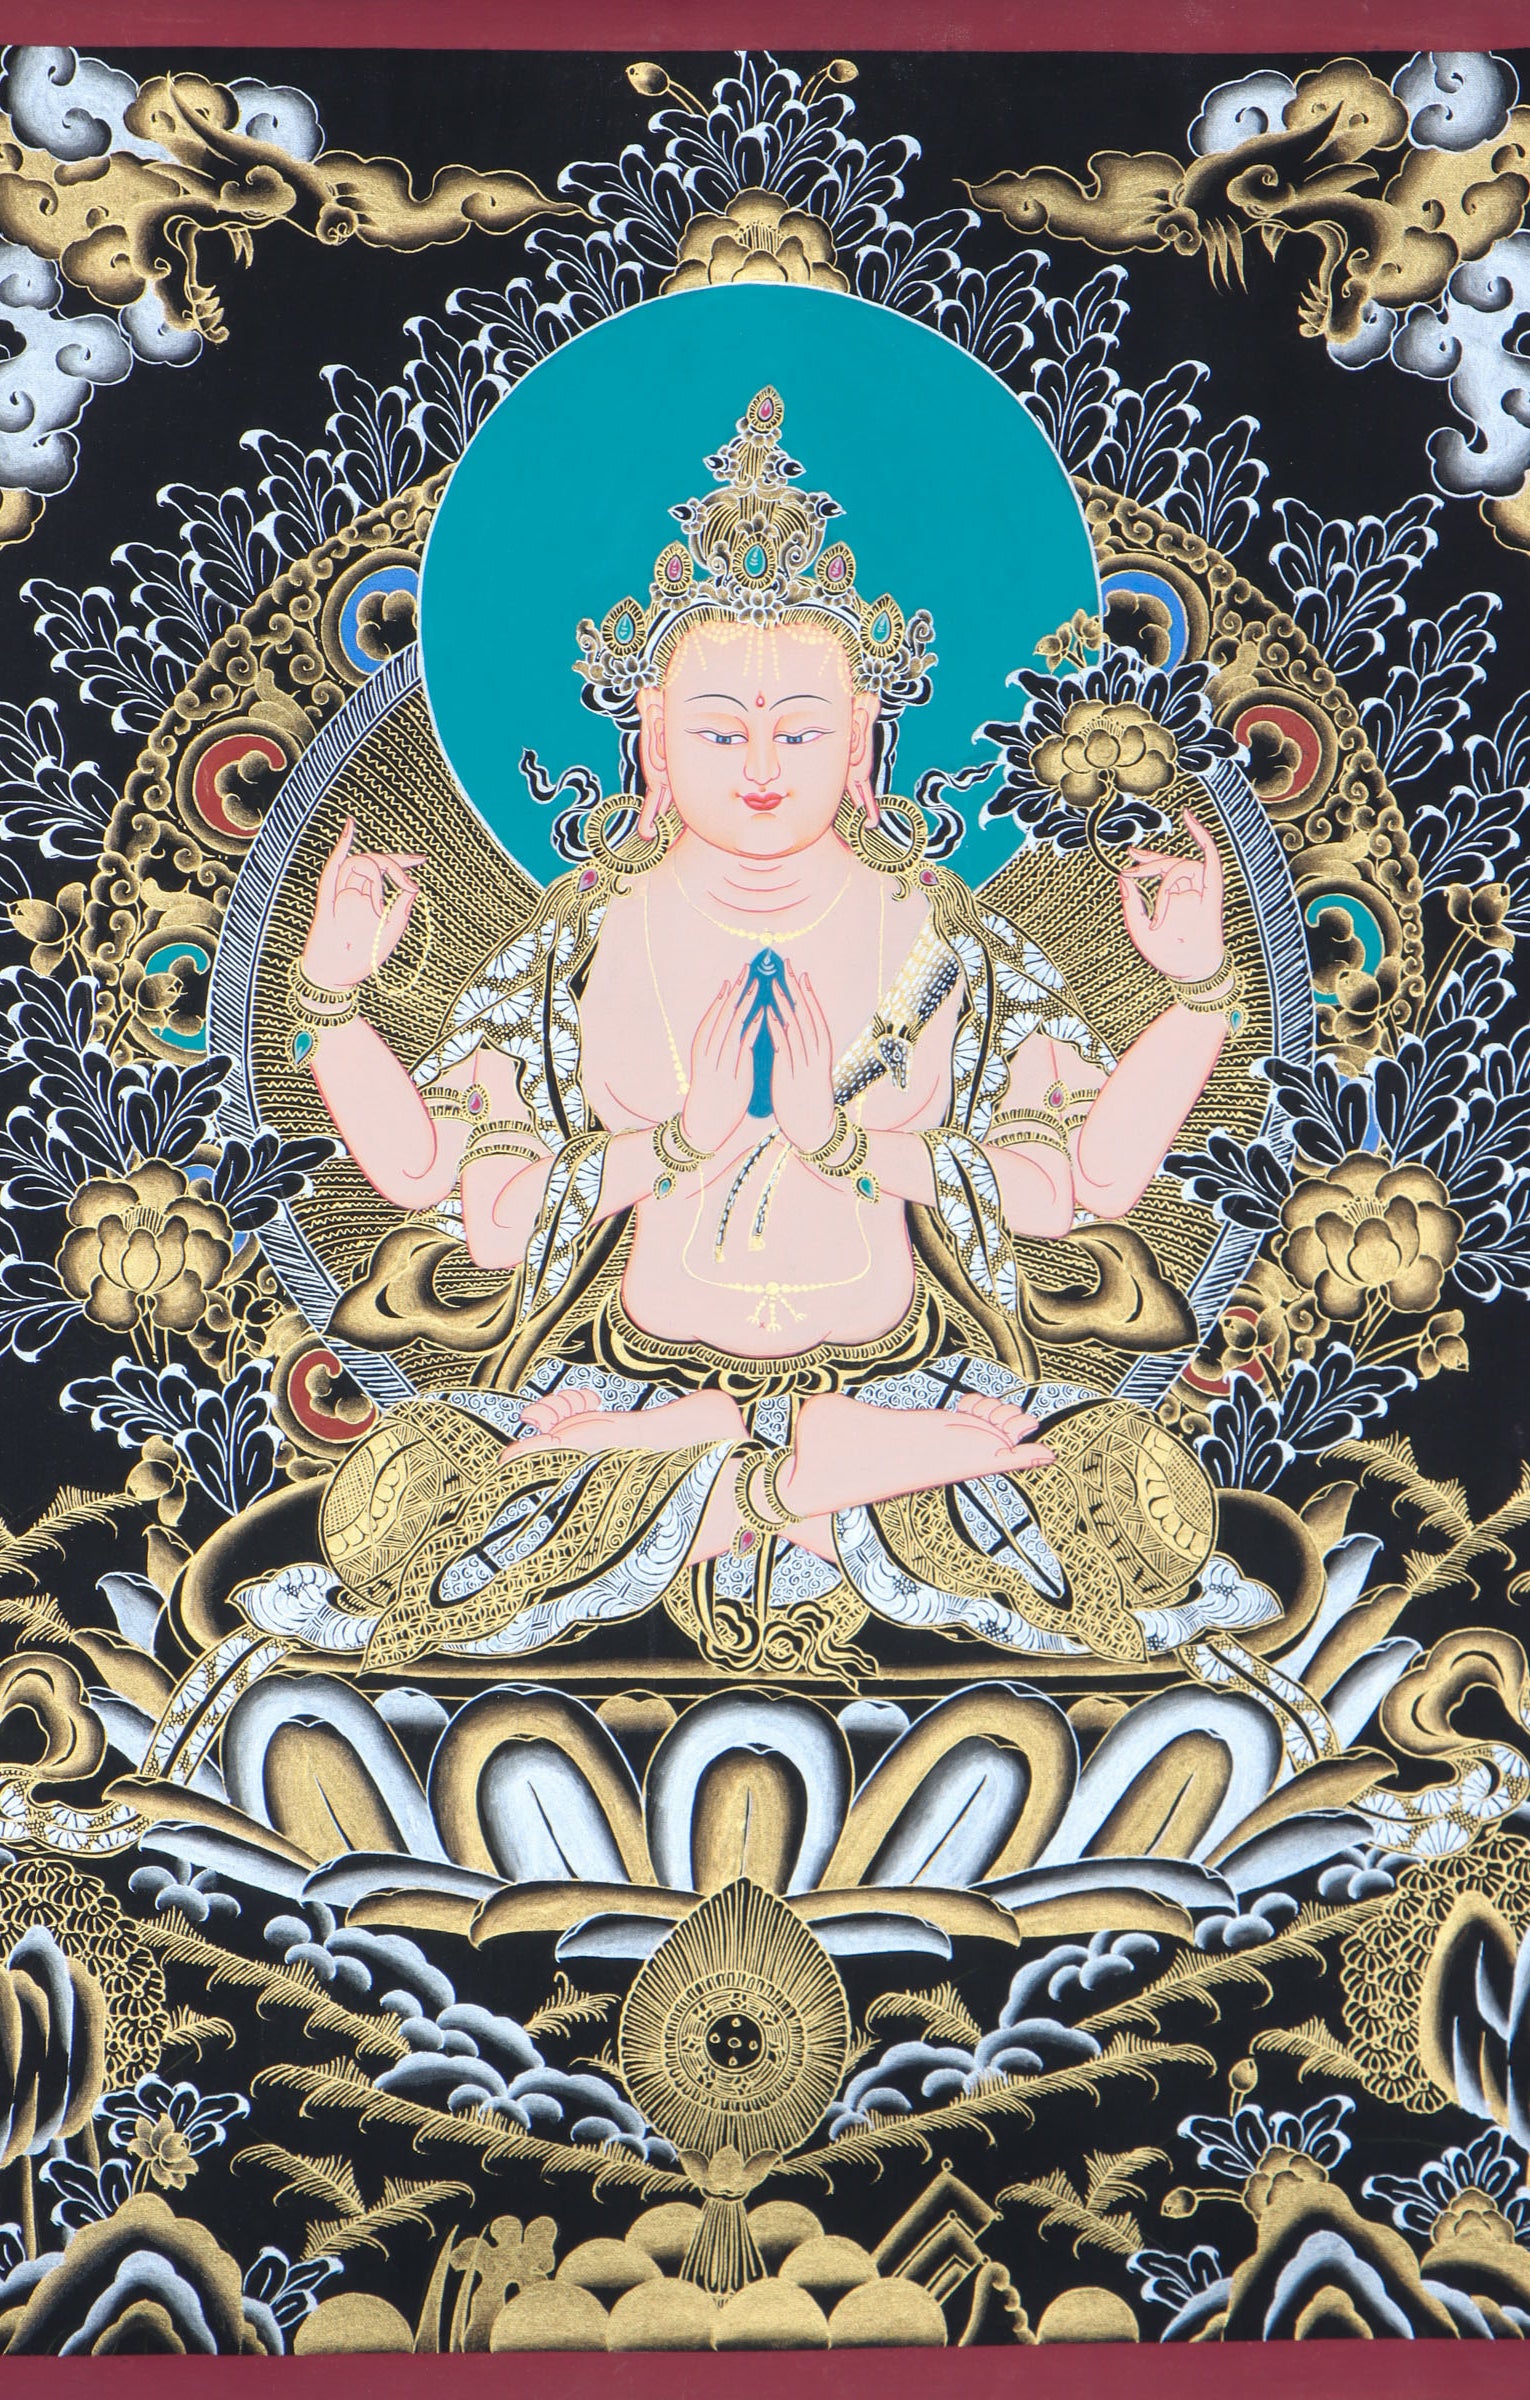  Chenrezig thangka serves as an educational tool, depicting the iconography and symbolism associated with Chenrezig. 